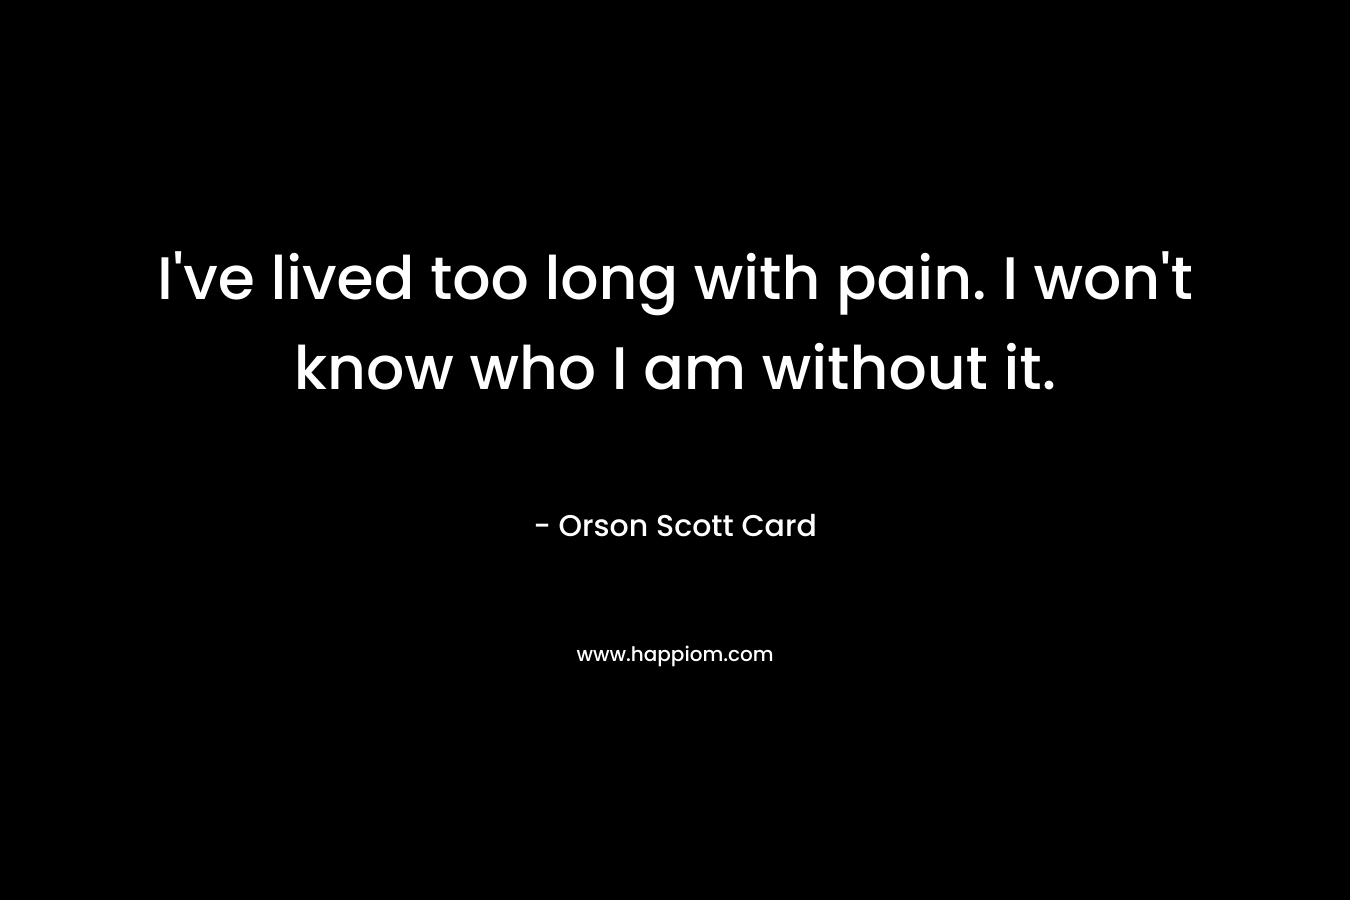 I've lived too long with pain. I won't know who I am without it.